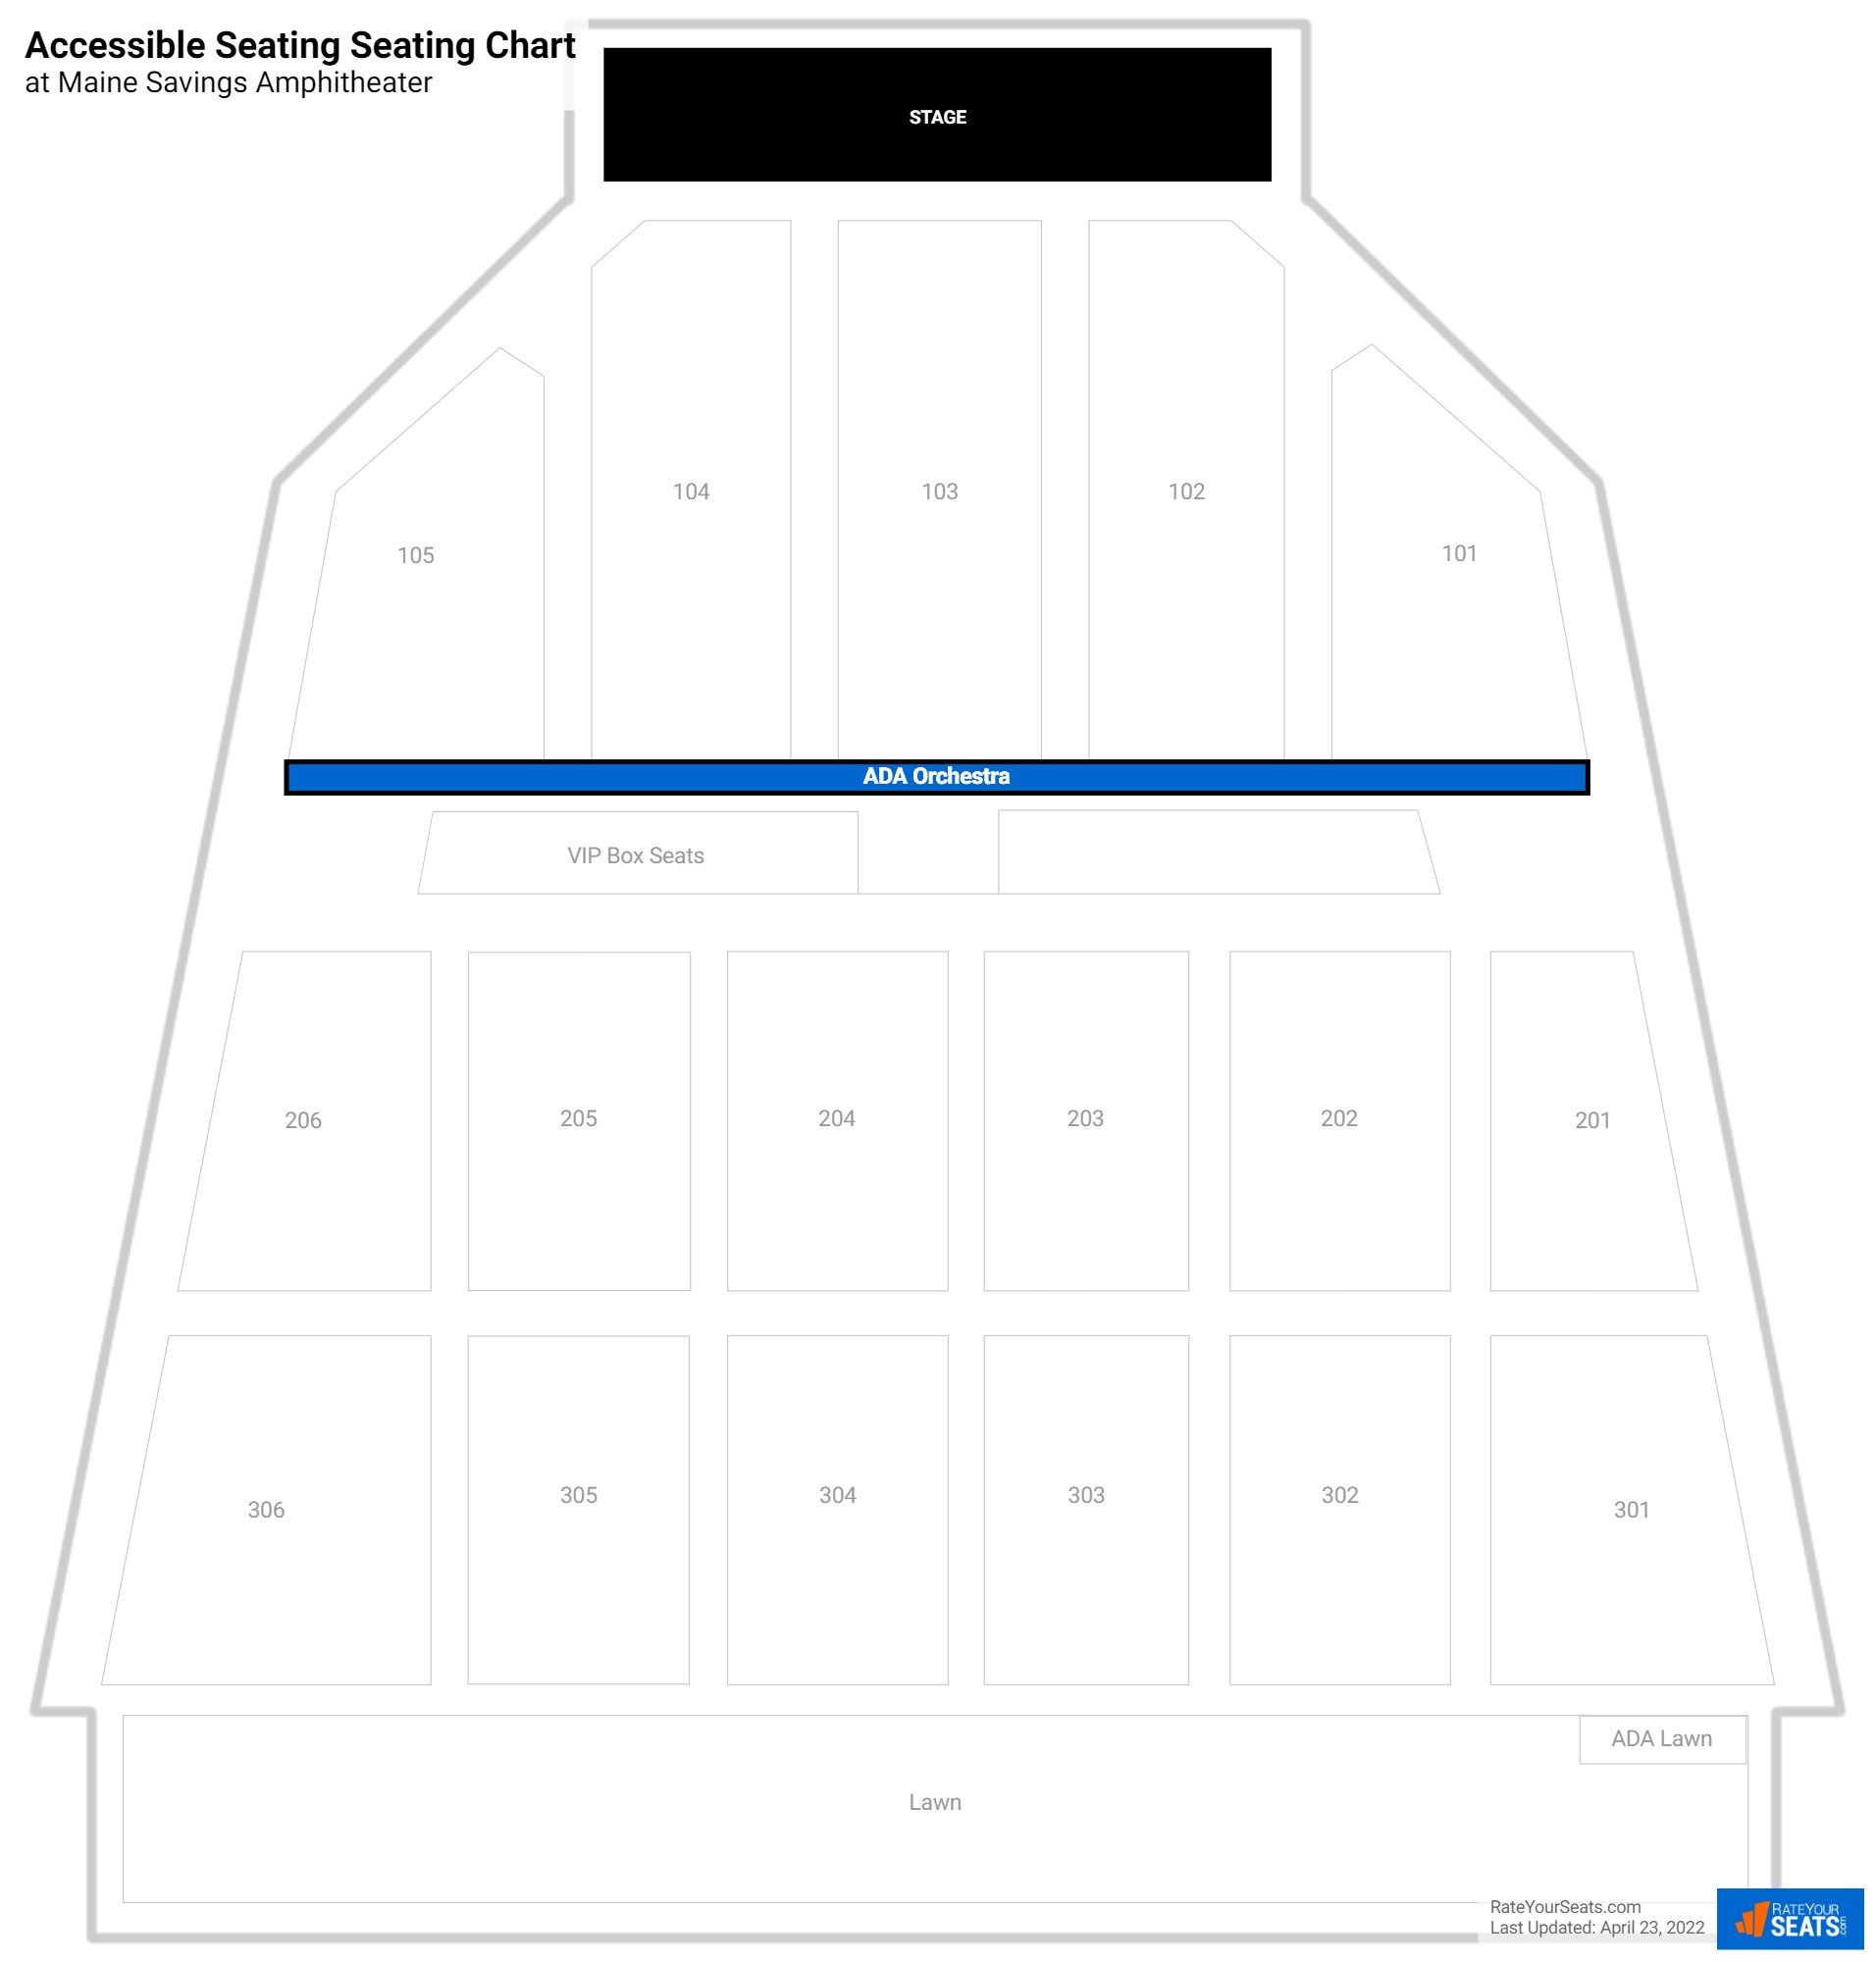 Concert Accessible Seating Seating Chart at Maine Savings Amphitheater